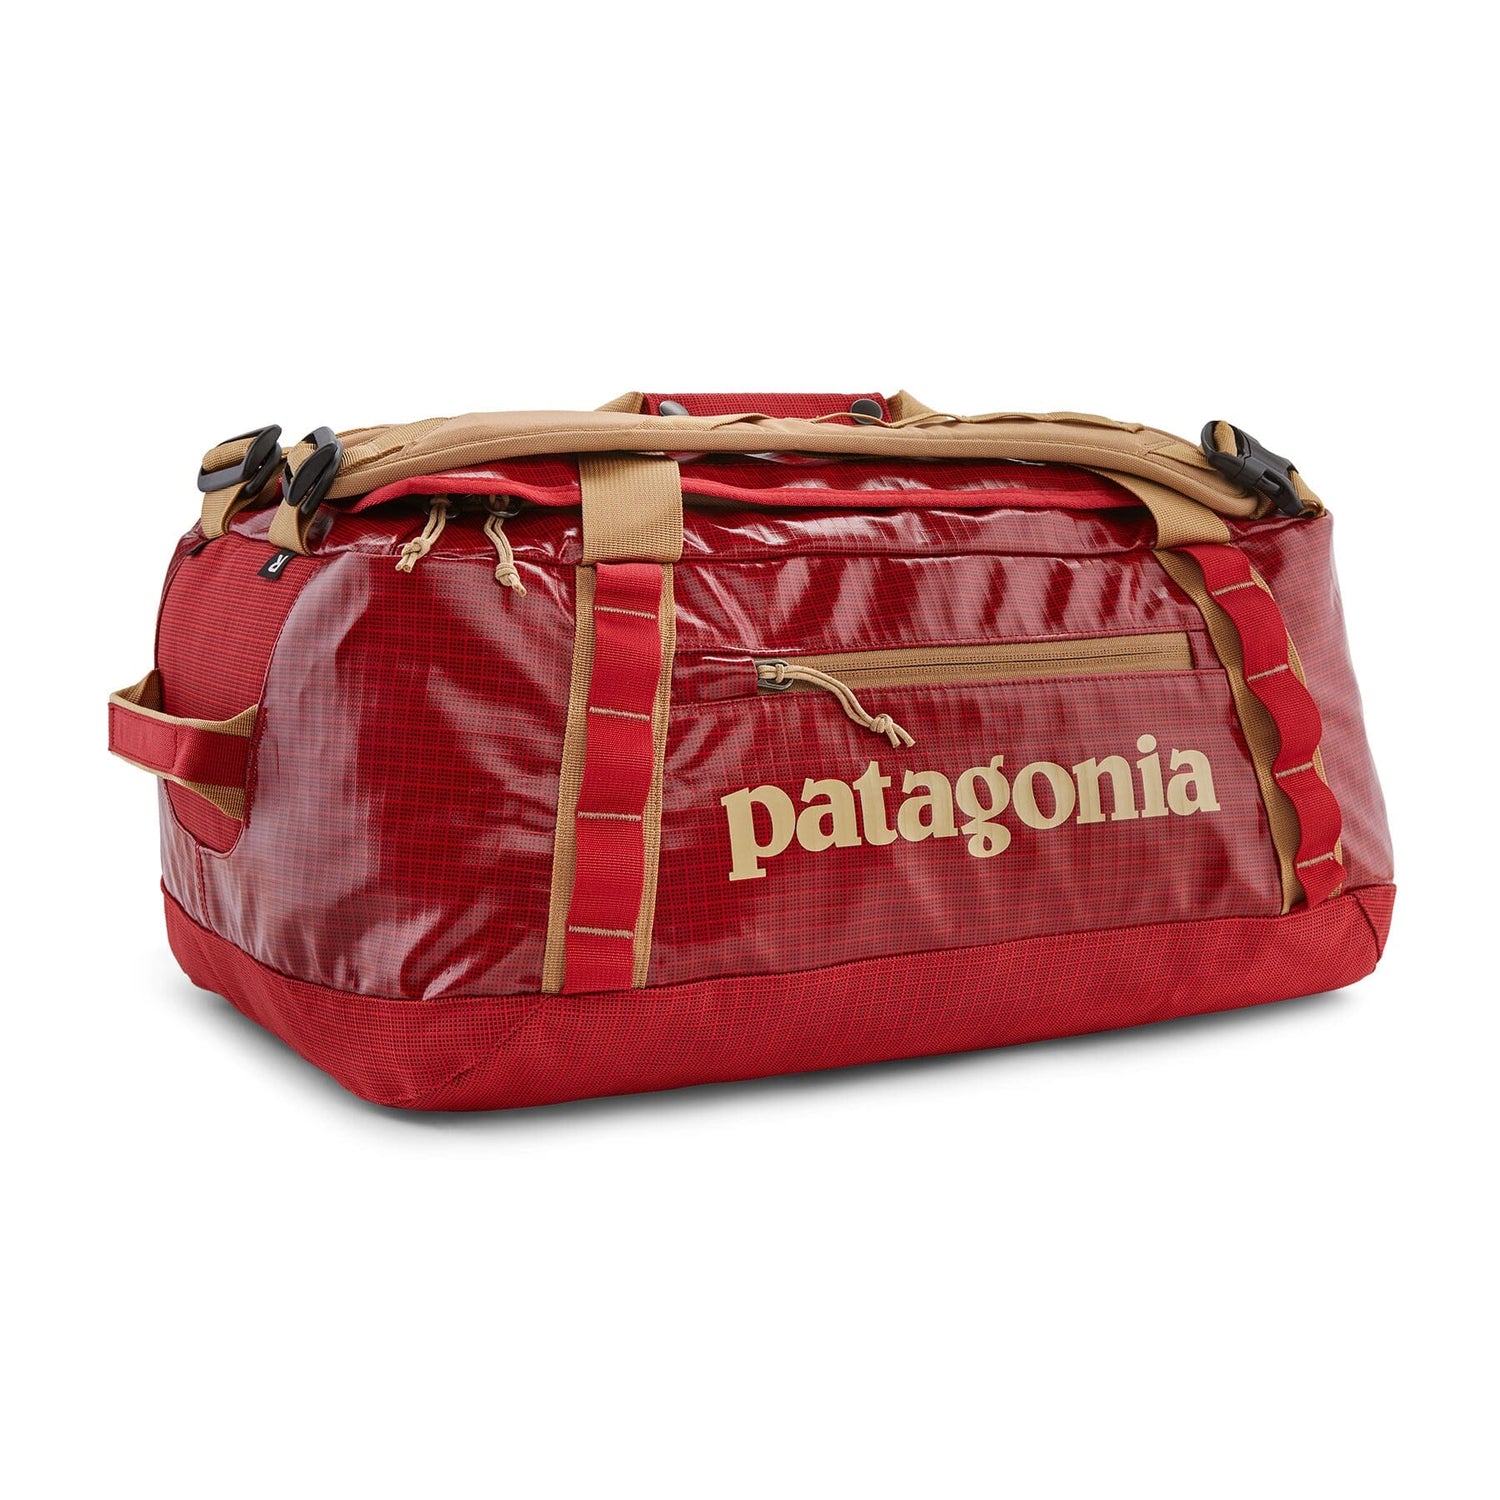 Patagonia Black Hole® Duffel Bag 40L - 100% Recycled Polyester Touring Red Bags